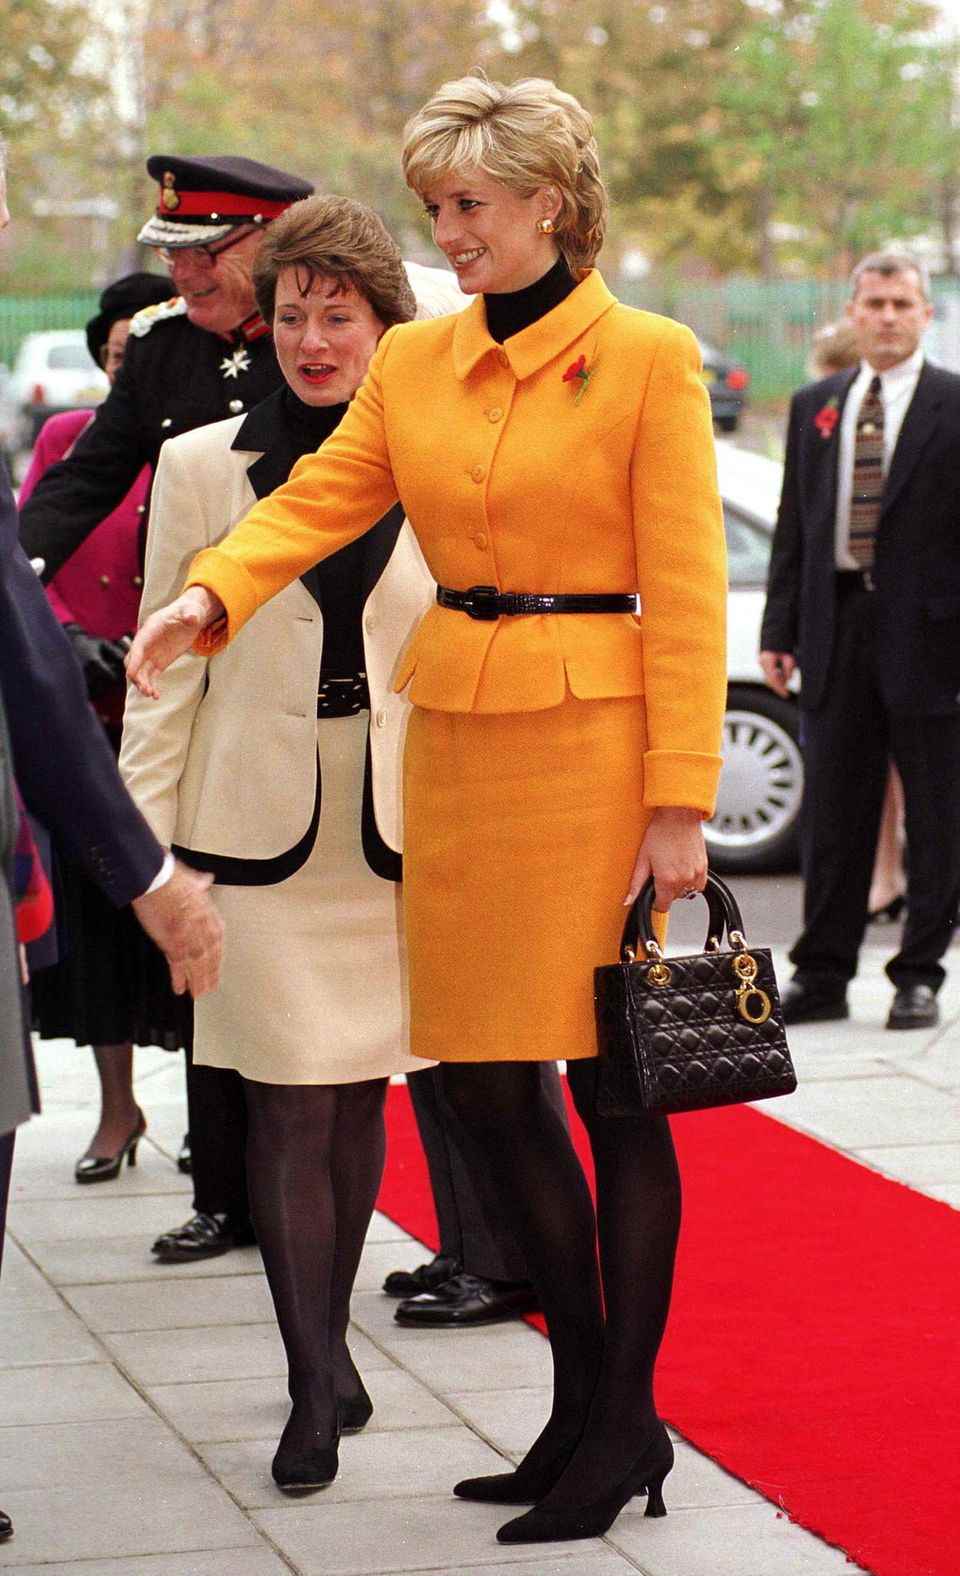 Princess Diana wearing a Versace orange suit and carrying her beloved Dior bag in Liverpool, November 1995